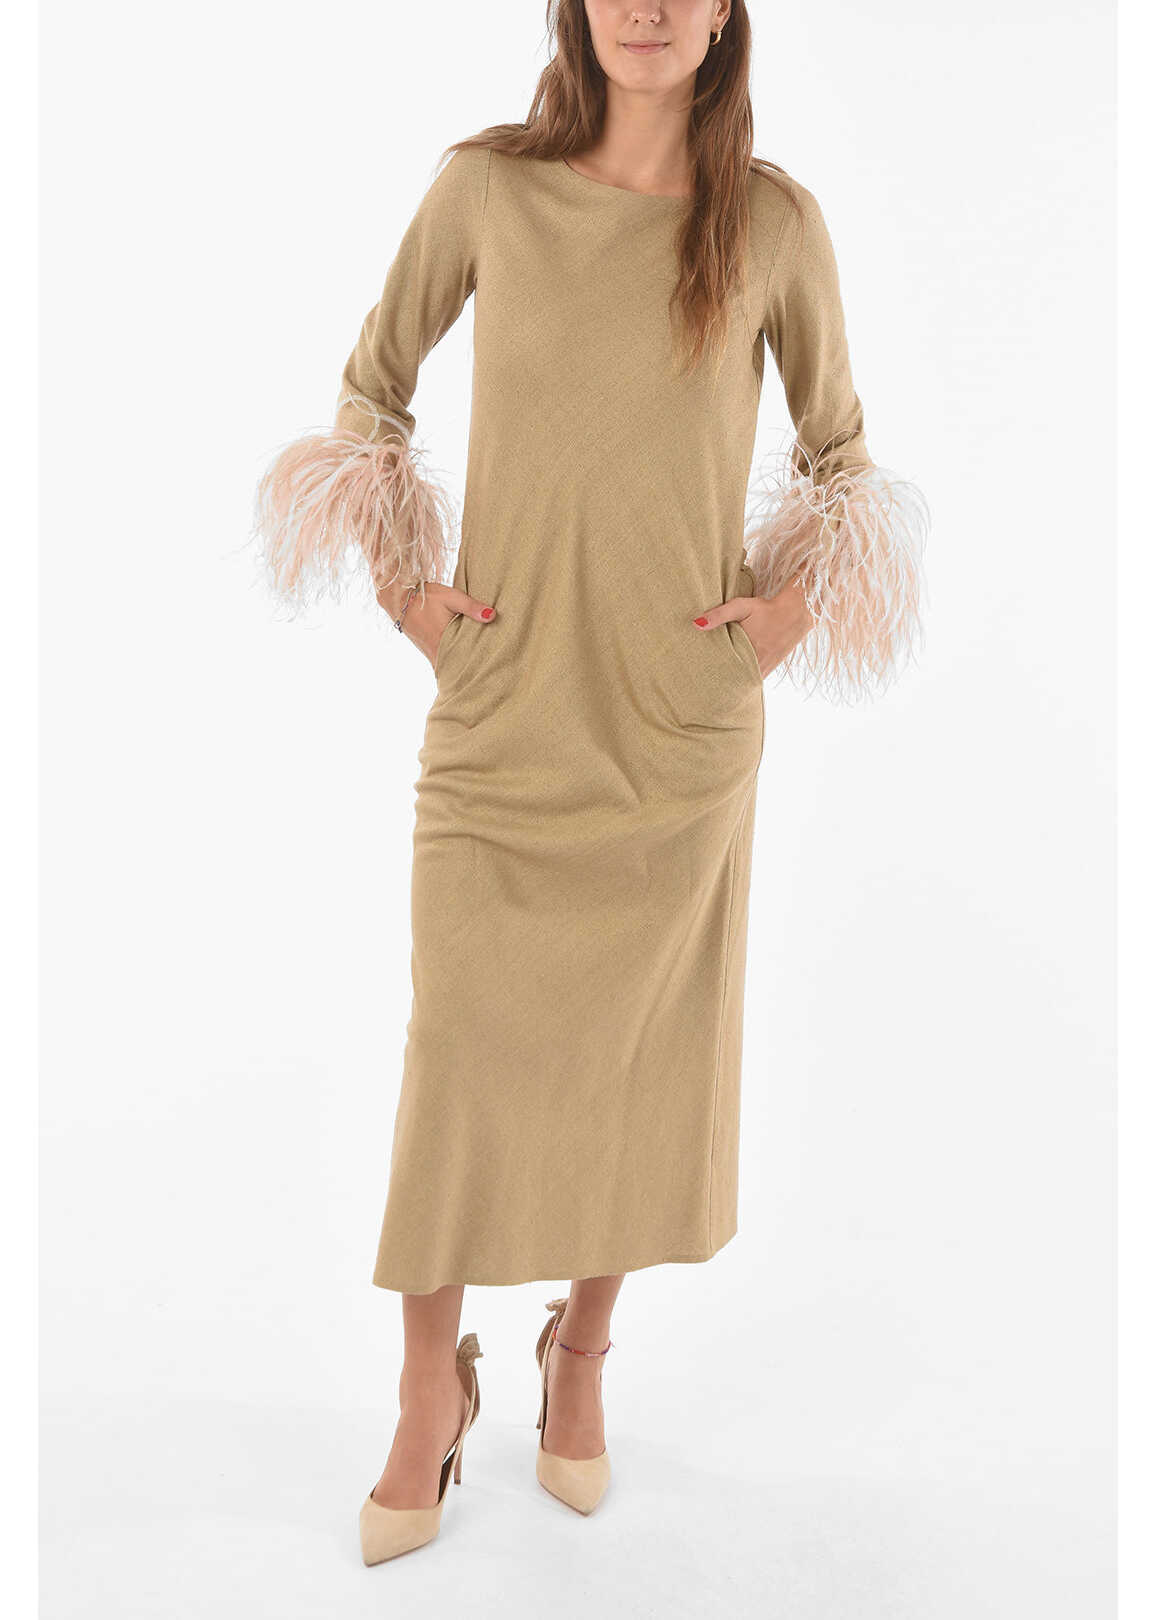 STEPHAN JANSON Silk Maxi Dress With Feathers On Bottom Sleeves Beige